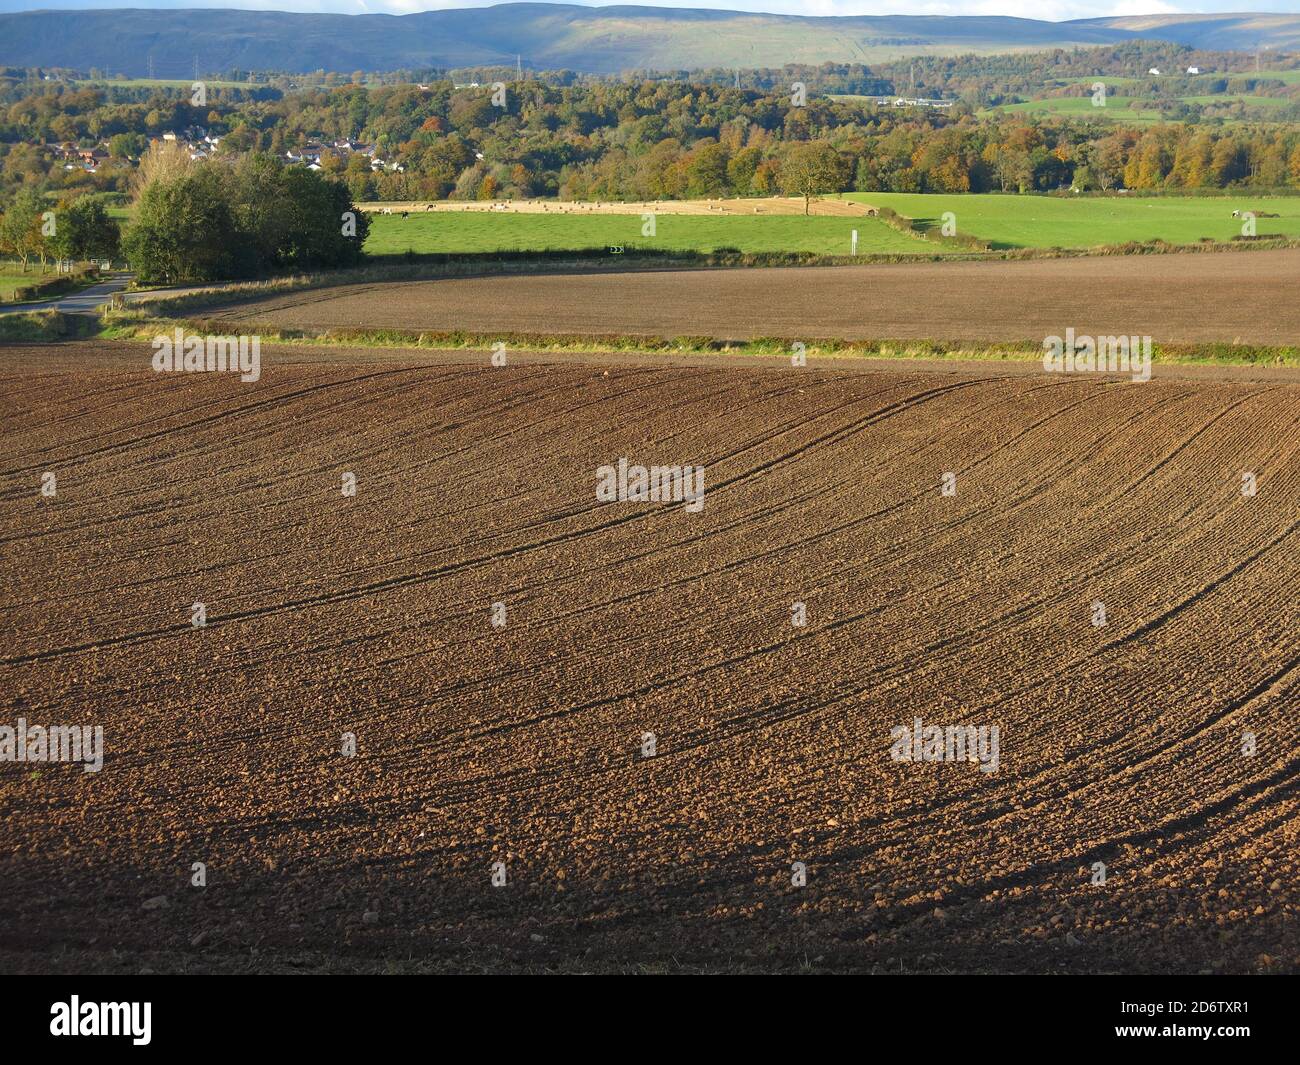 Looking north towards the Campsie Fells across ploughed fields in early autumn; the countryside of Central Scotland just outside Bearsden, Glasgow. Stock Photo